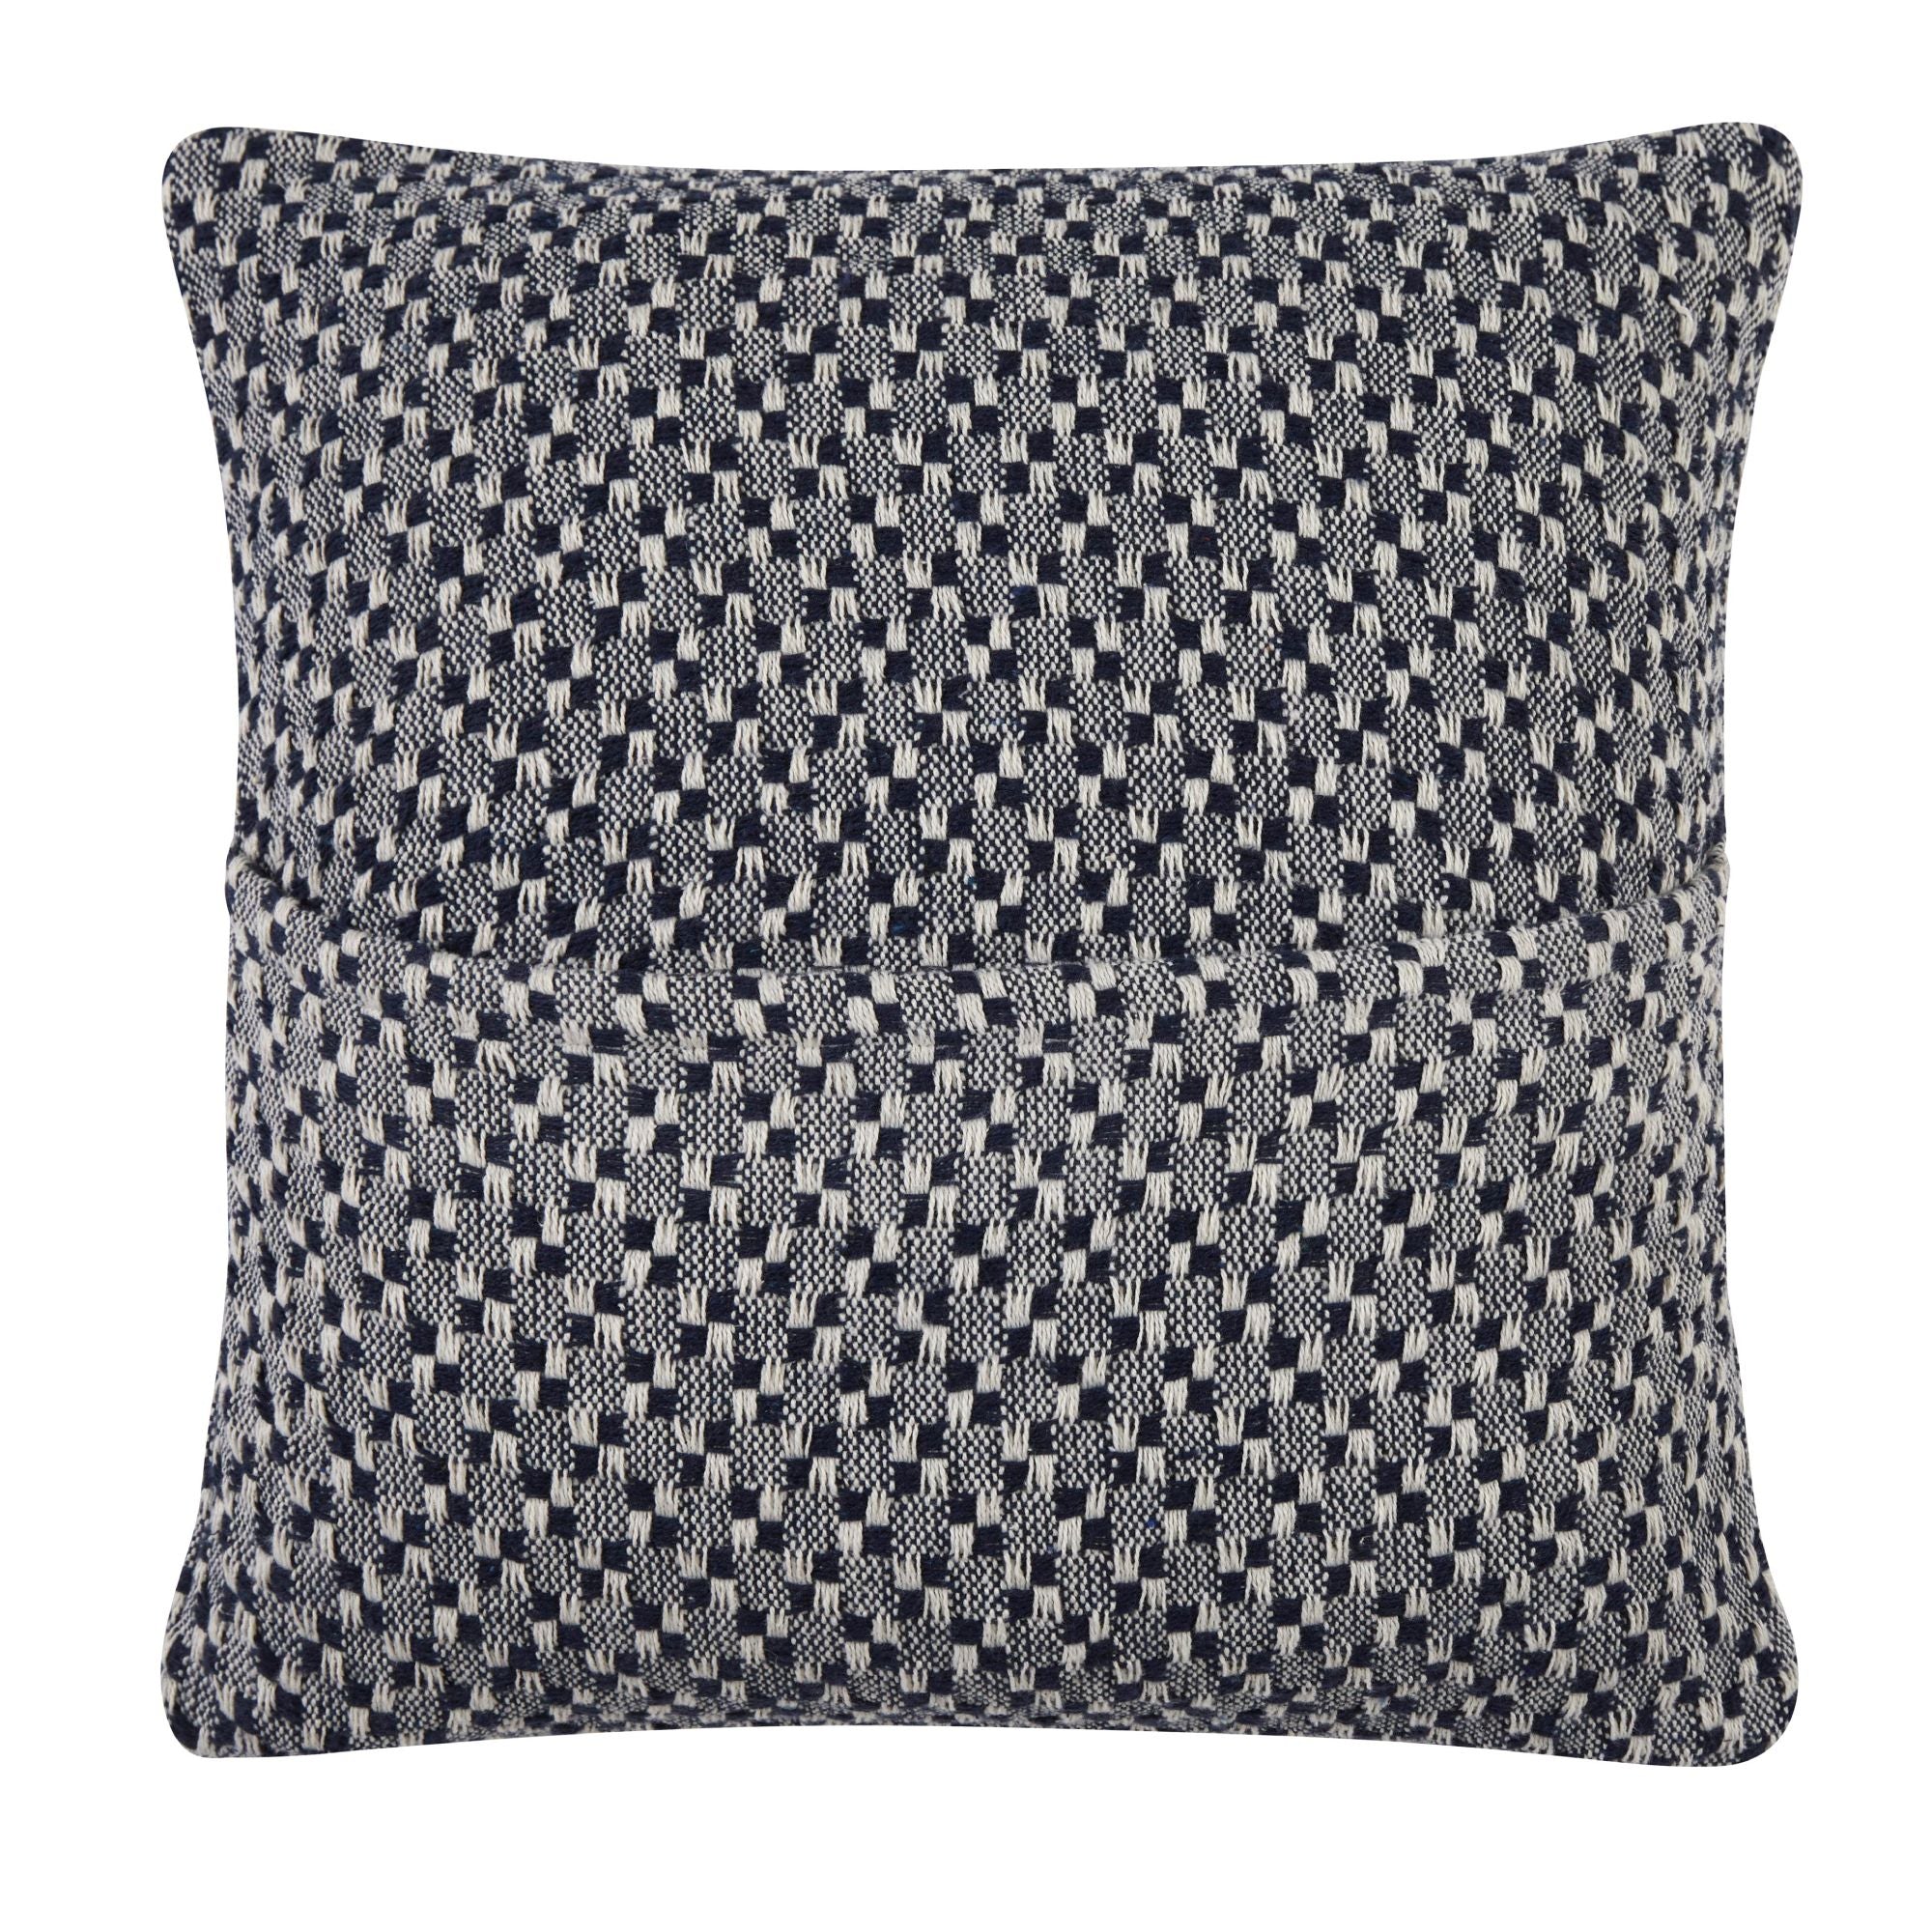 Appletree Bexley Recycled Cushion Cover - Navy